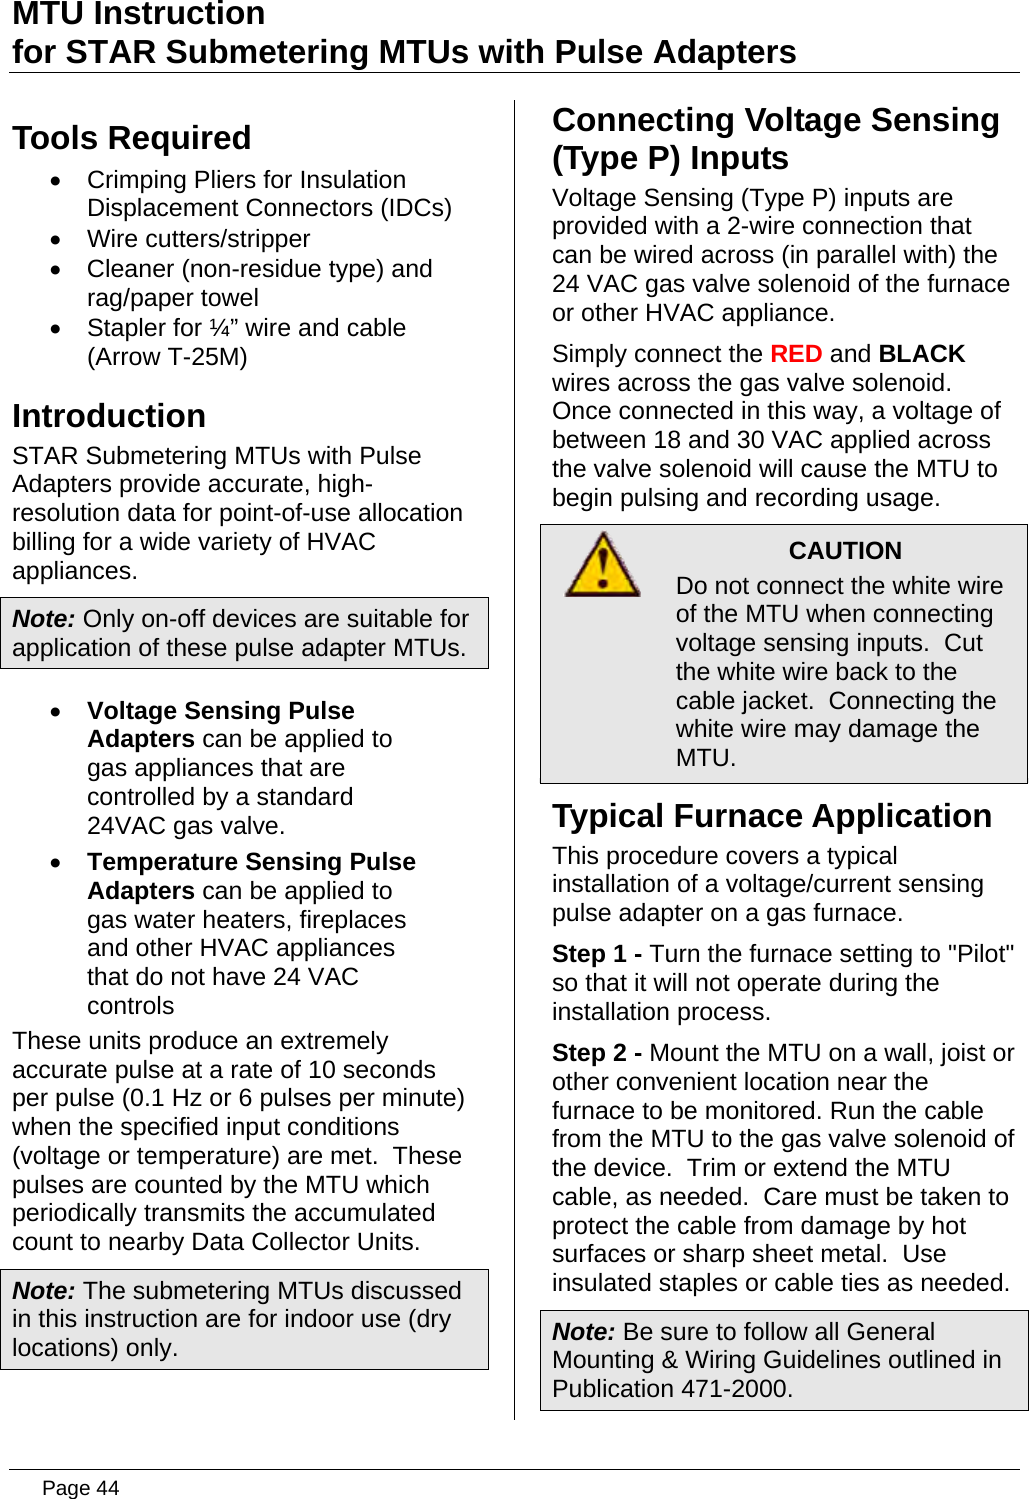 Page 44 of Aclara Technologies 09015 Transmitter for Meter Reading User Manual users manual